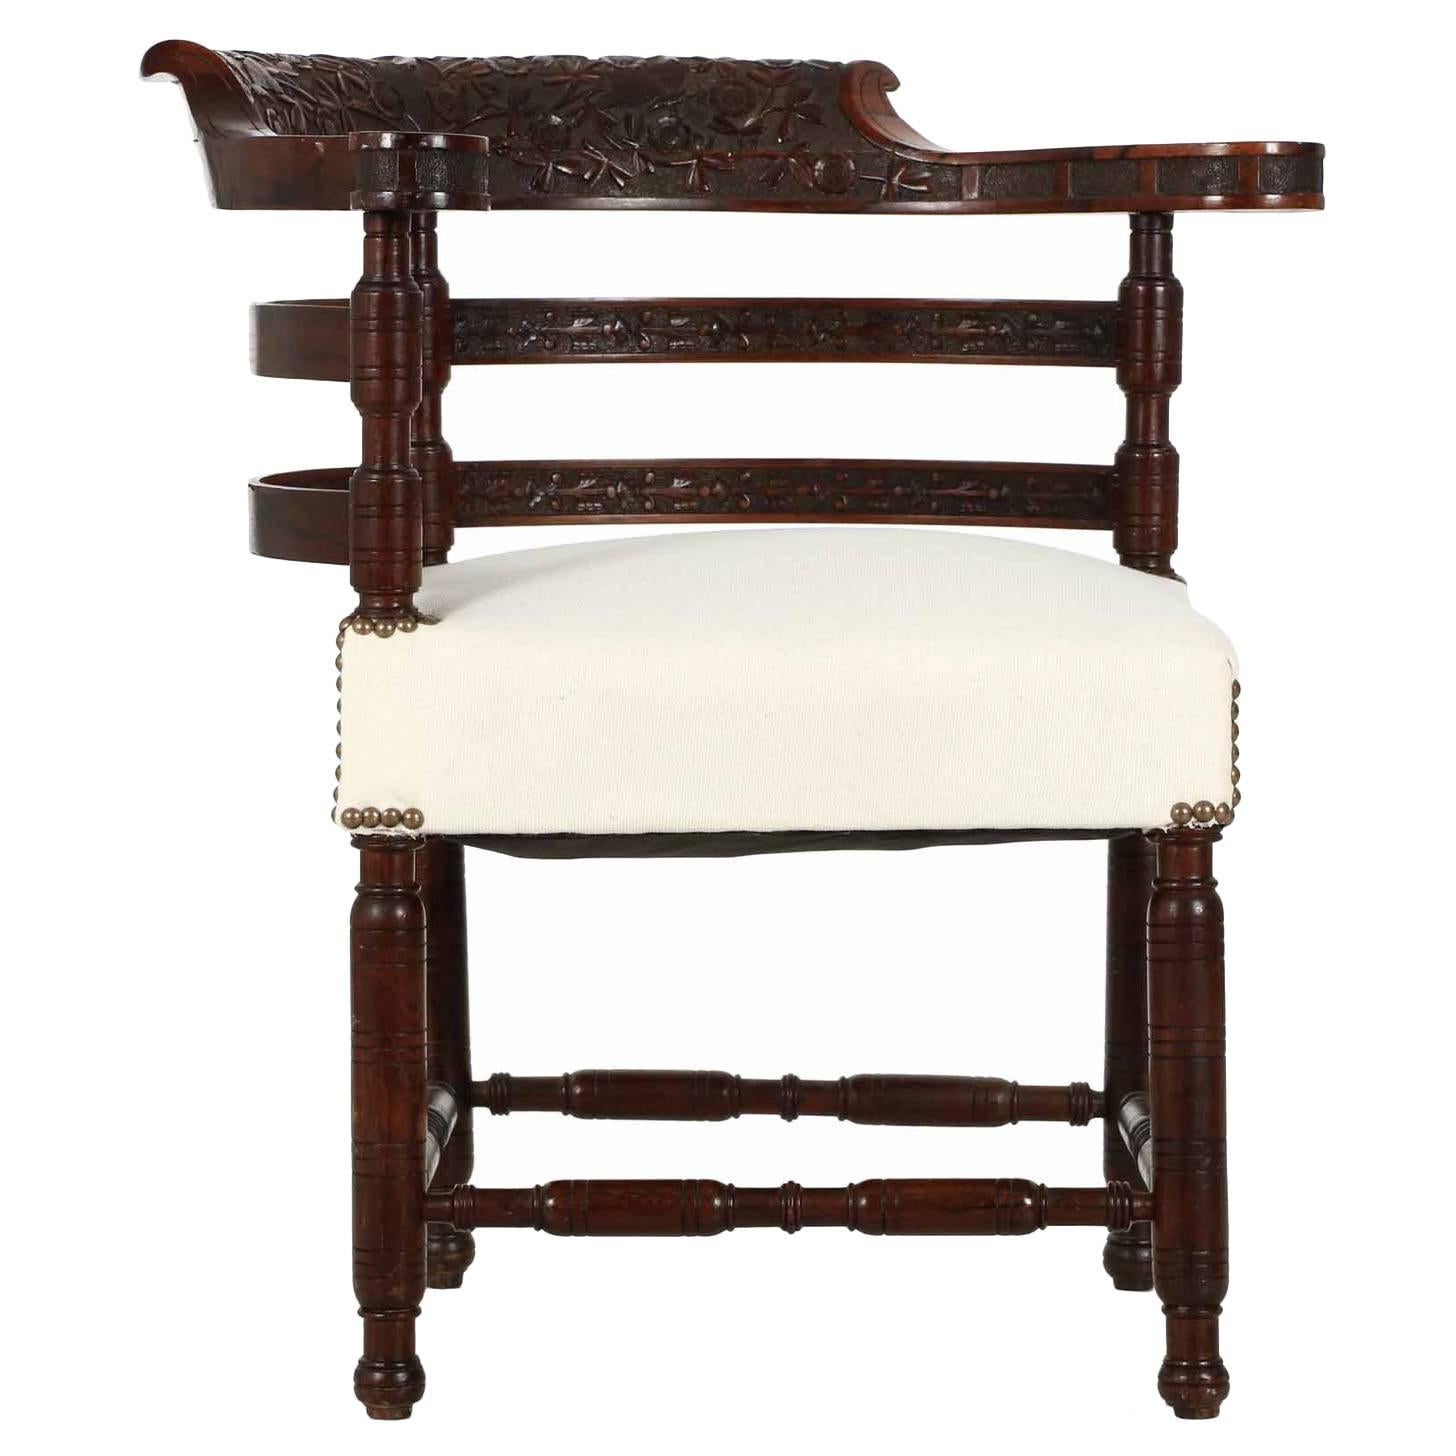 Aesthetic Movement Carved Rosewood Corner Chair, circa 1880